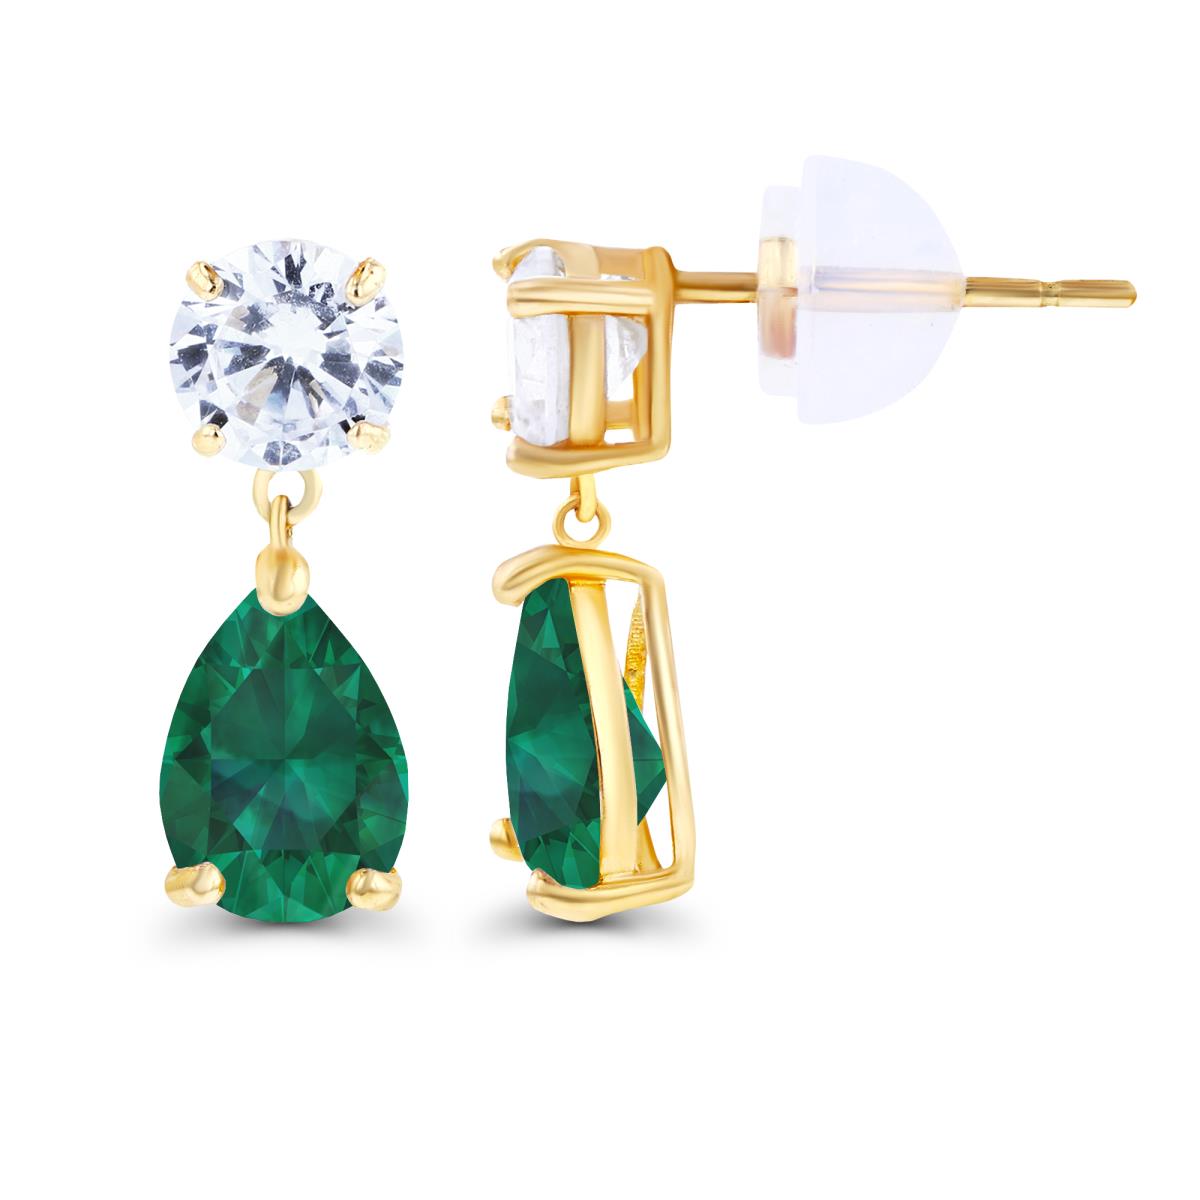 14K Yellow Gold 6x4mm Pear Created Emerald & 4.5mm Round Created White Sapphire Earrings with Silicon Backs